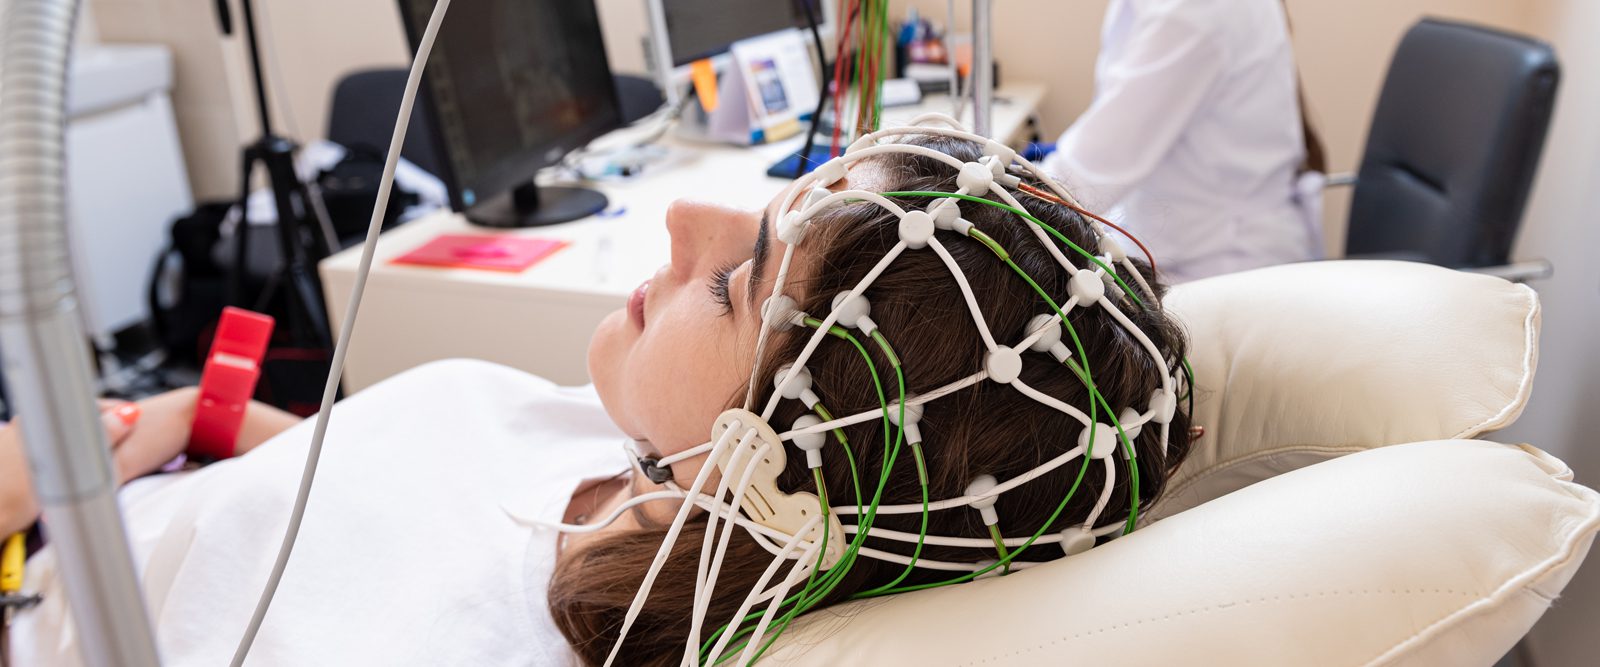 A young woman with electrodes on her scalp getting EEG readings for epilepsy.